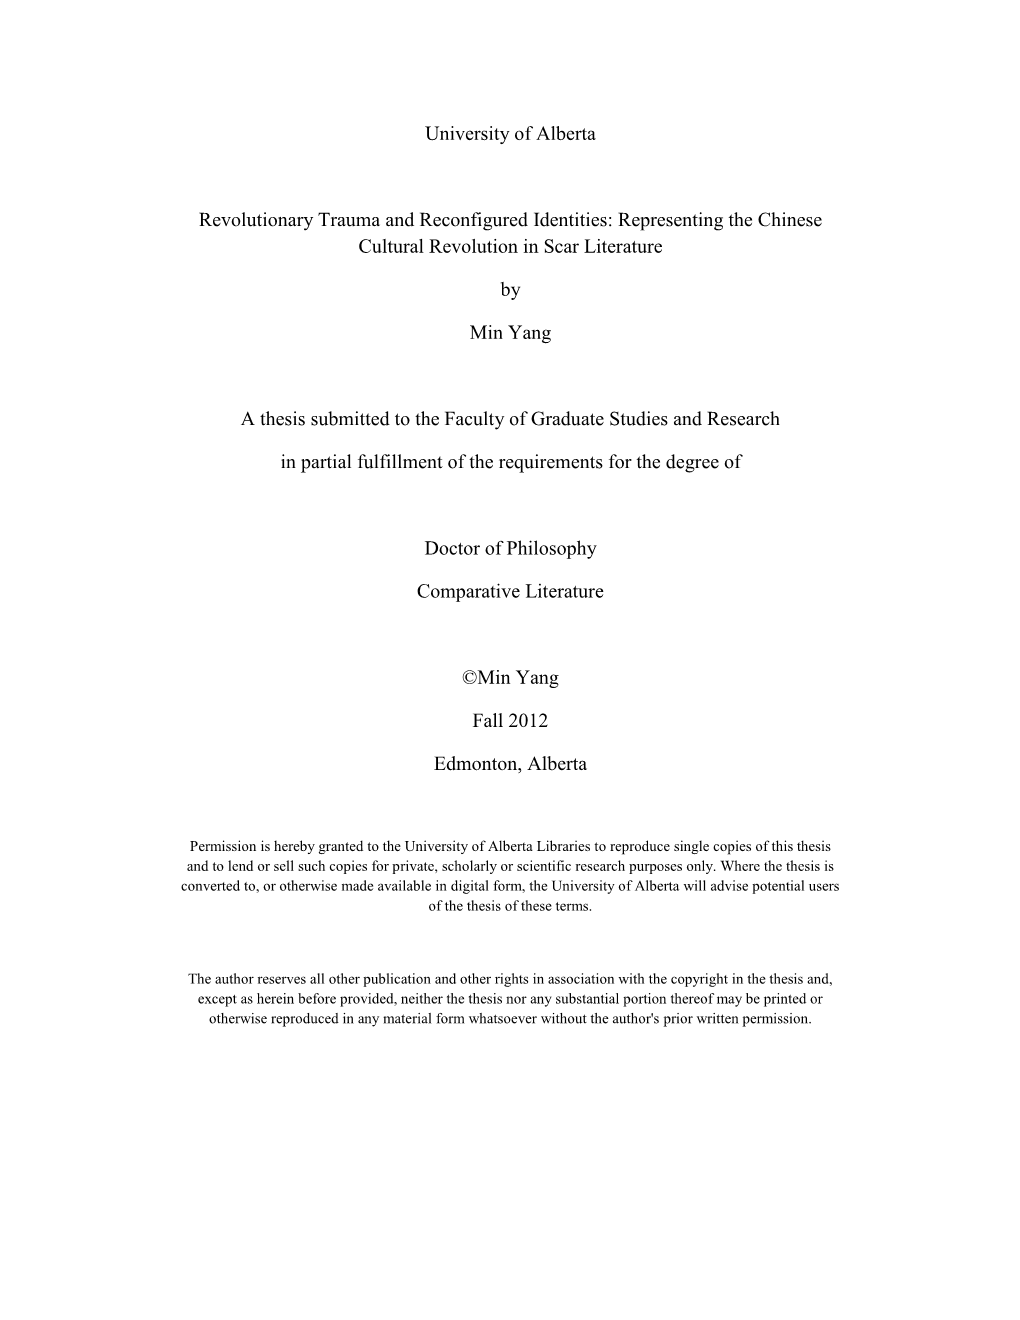 Revolutionary Trauma and Reconfigured Identities: Representing the Chinese Cultural Revolution in Scar Literature